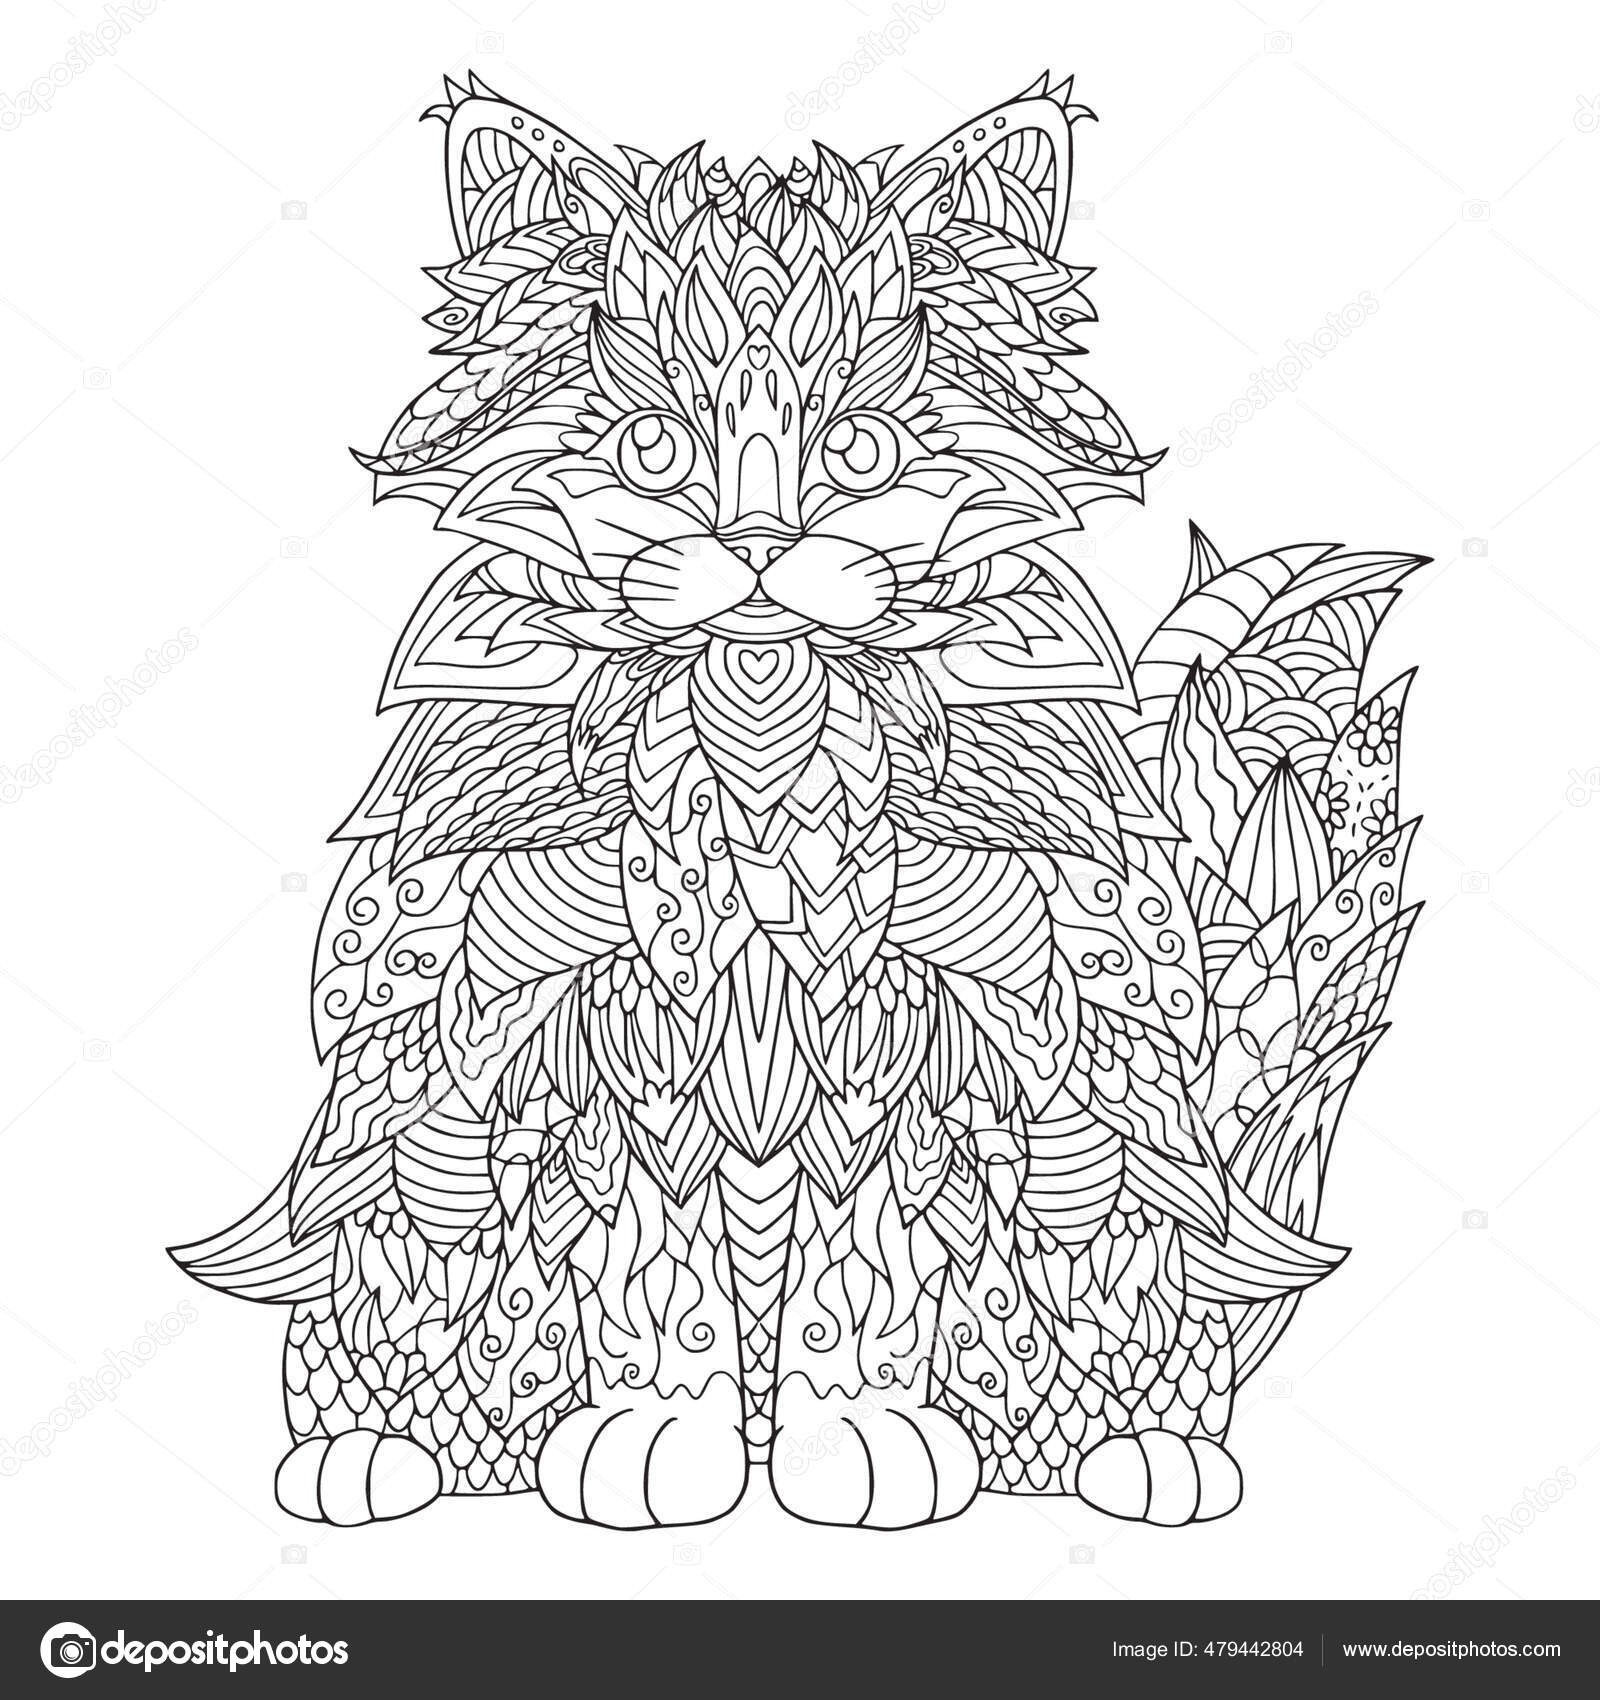 Coloring book cat vintage pattern zentangle elements isolated white hand stock vector by daniellabelaya